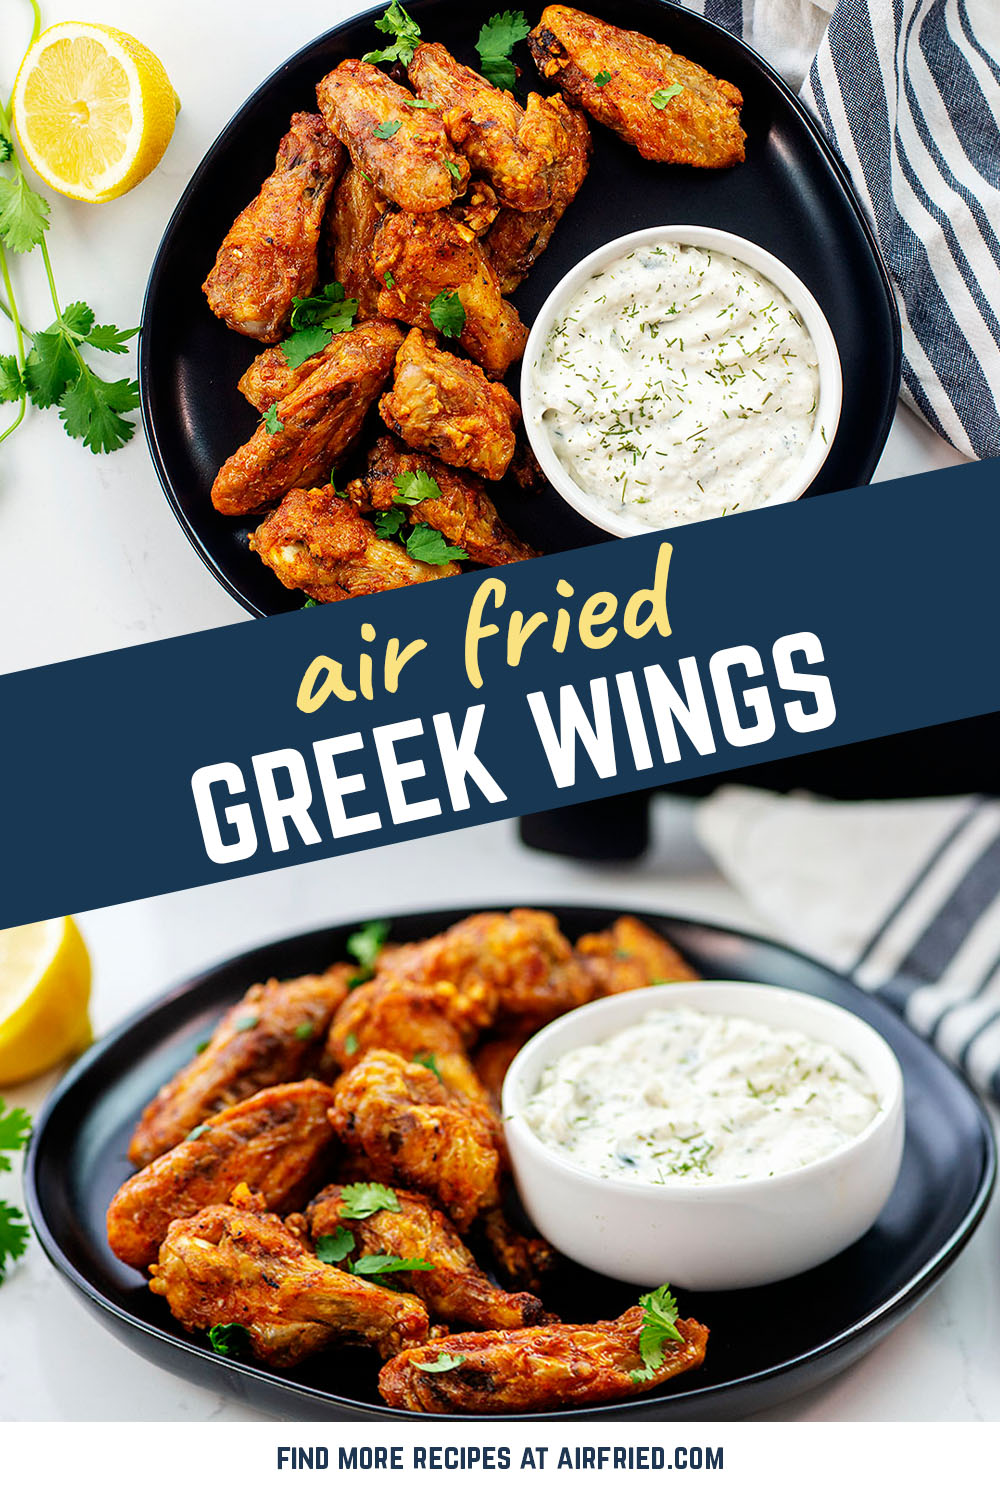 Chicken wings seasoned with greek flavors and served with tatziki sauce should be in every restaurant!